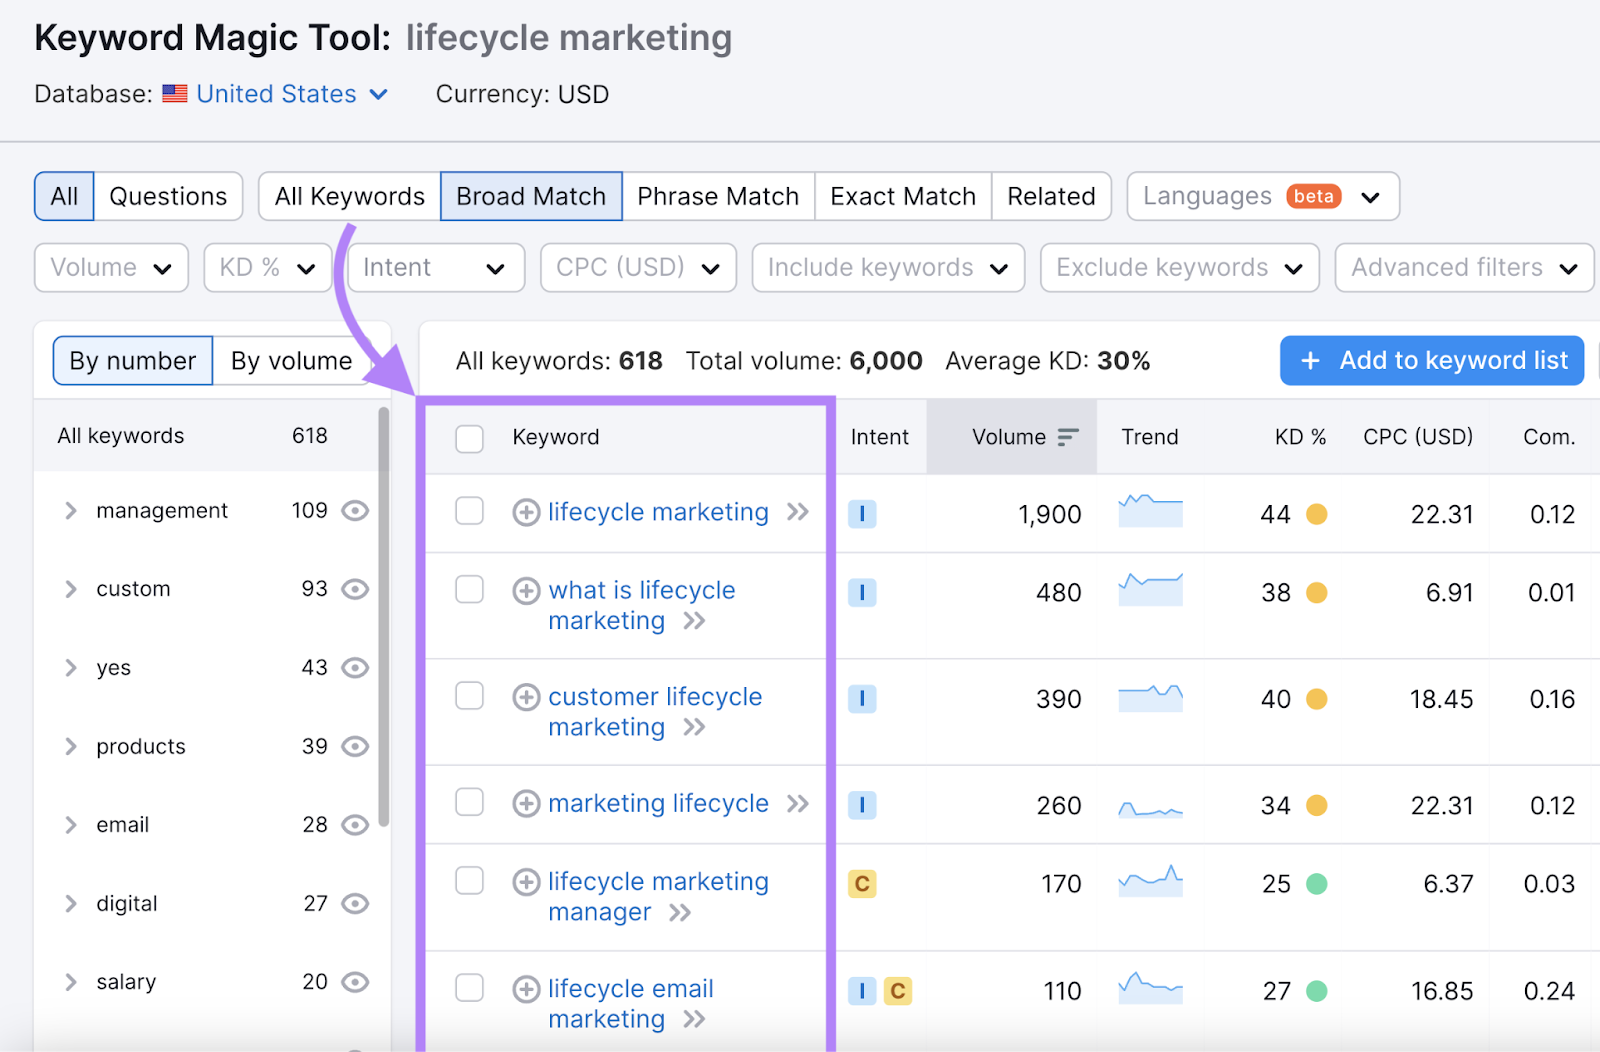 A list of related keywords for "lifecycle marketing"